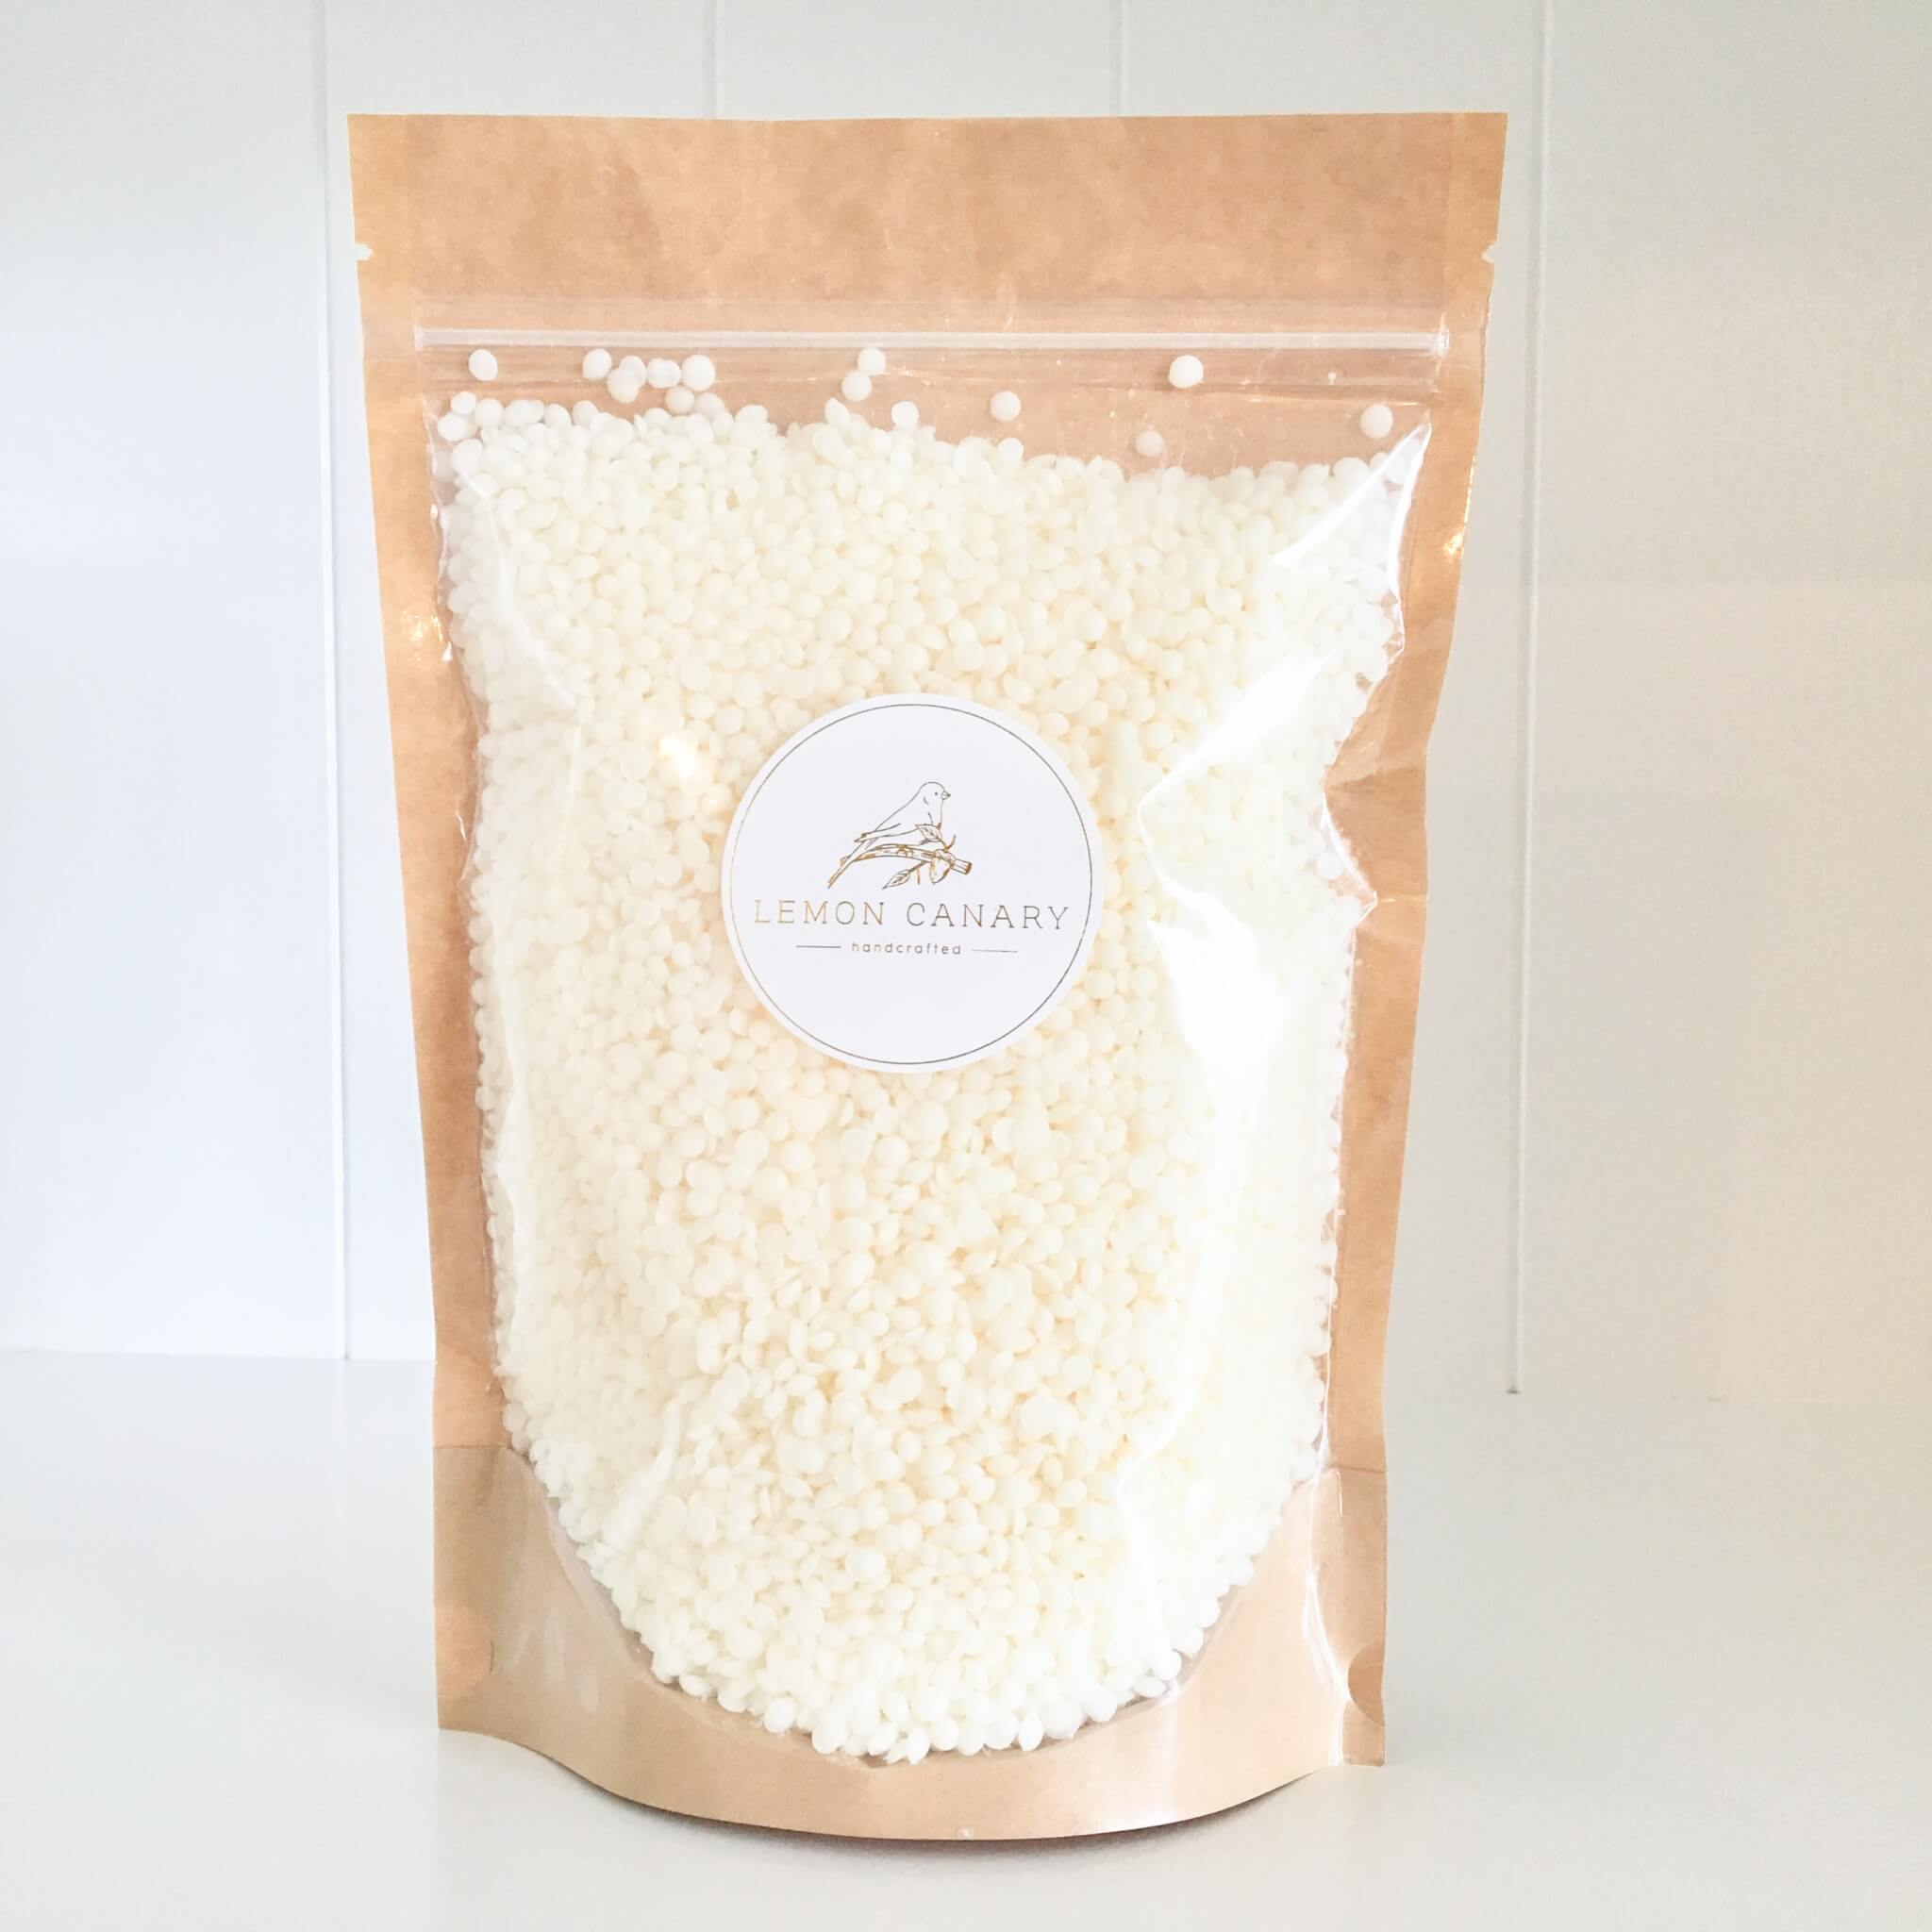 500g pouch of Lemon Canary natural soy wax for candlemaking